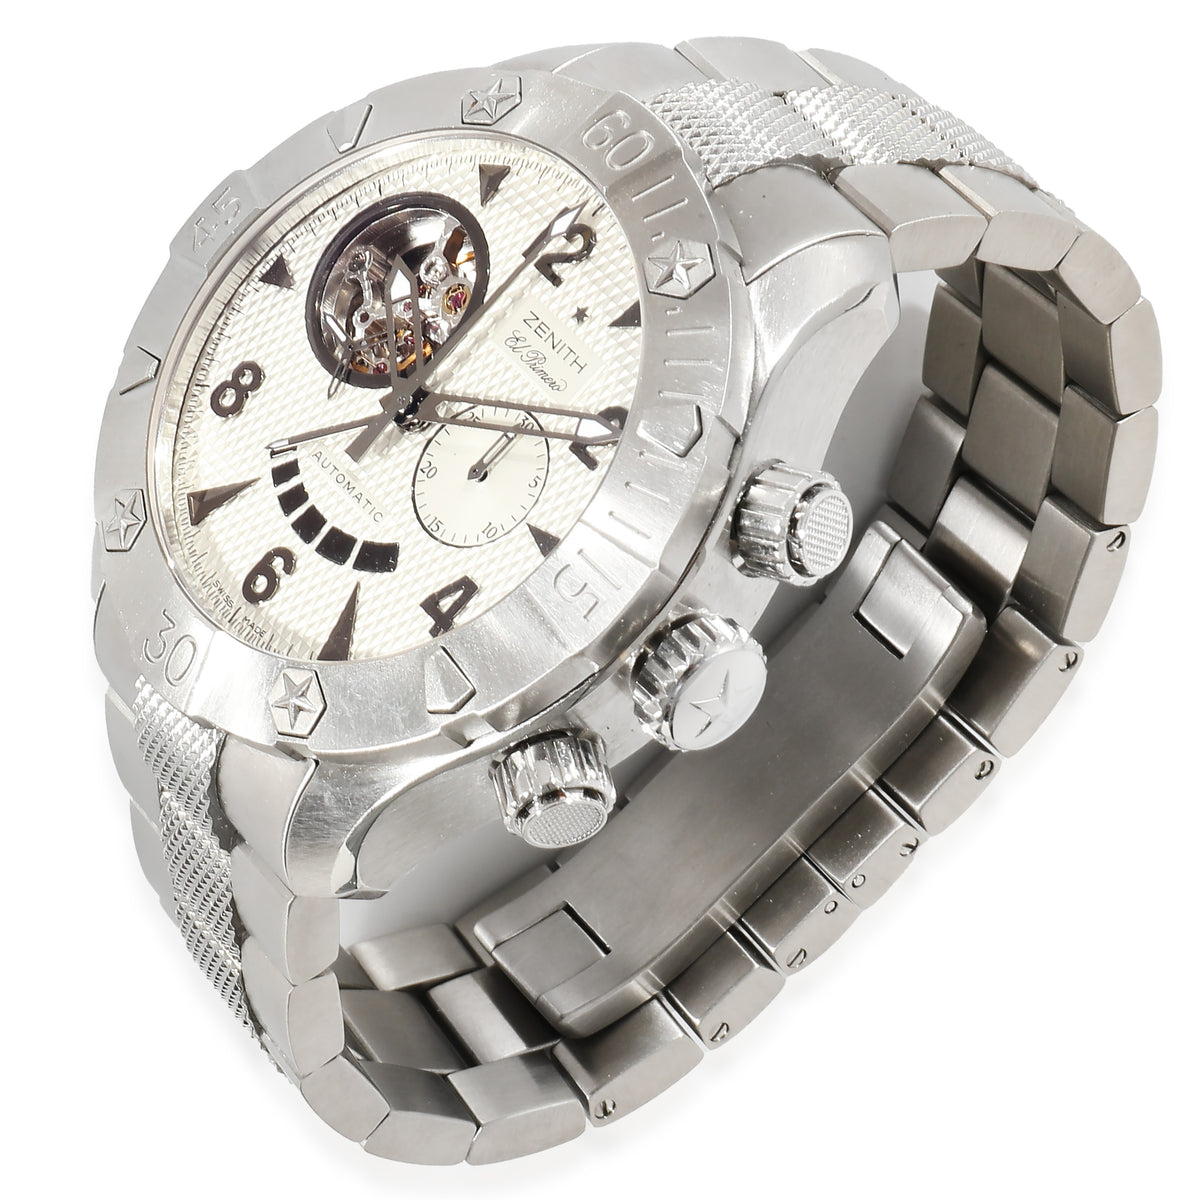 Defy Classic 03.0526.4021 Men's Watch in  Stainless Steel